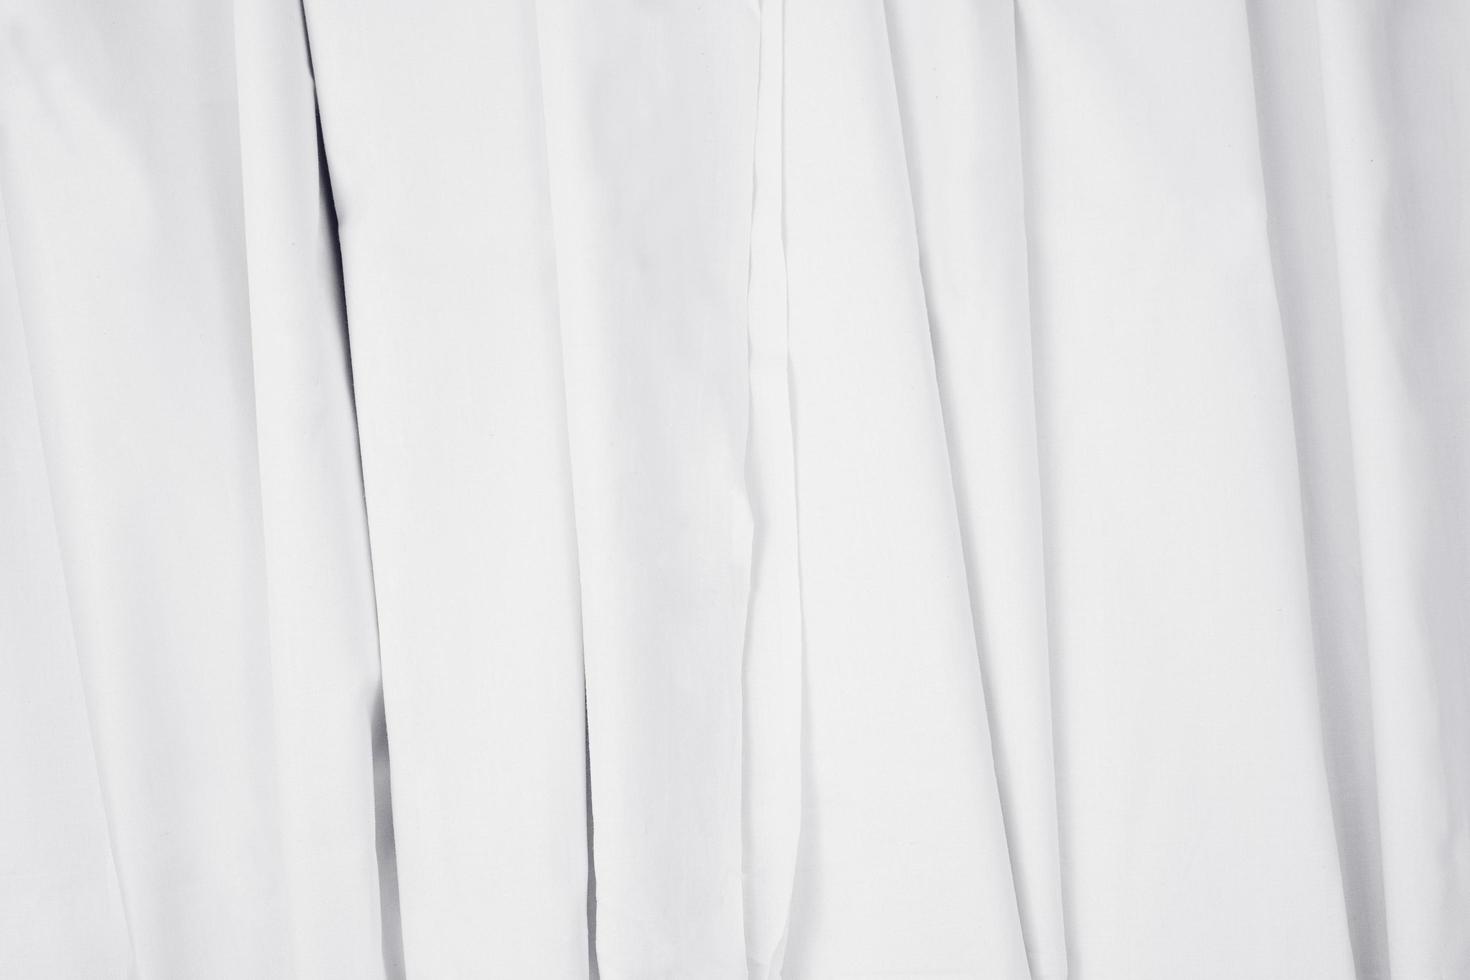 wavy folded white fabrics. well designed white curtain concept. textile texture mockup for creative design preview. photo